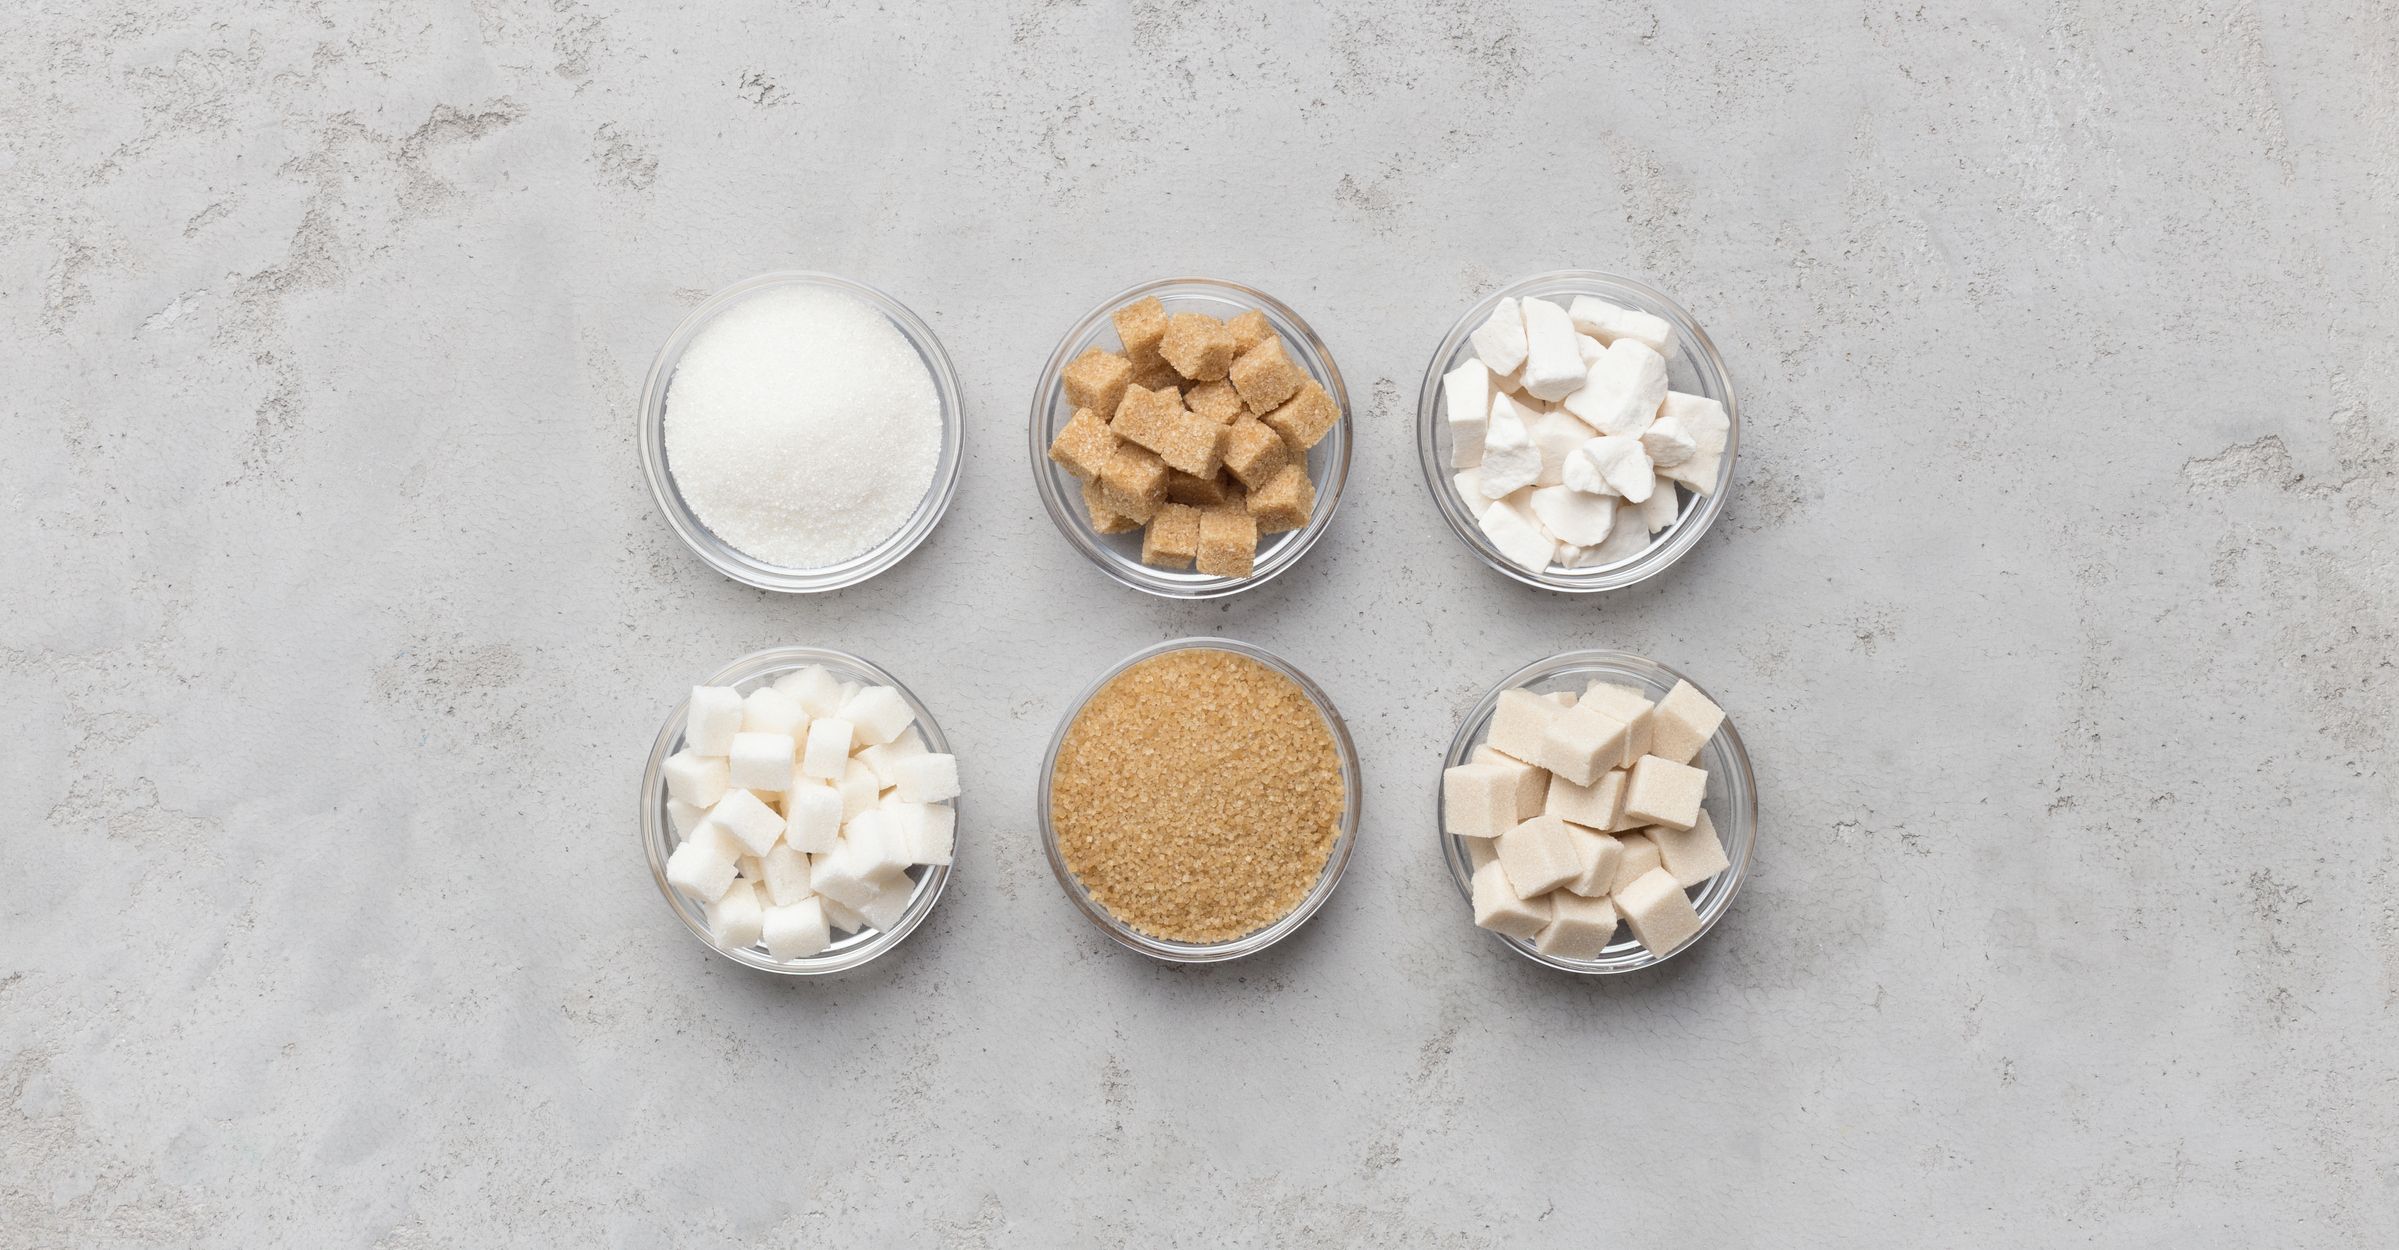 Stevia vs. Sucralose: What's The Difference? A Nutritionist Weighs In